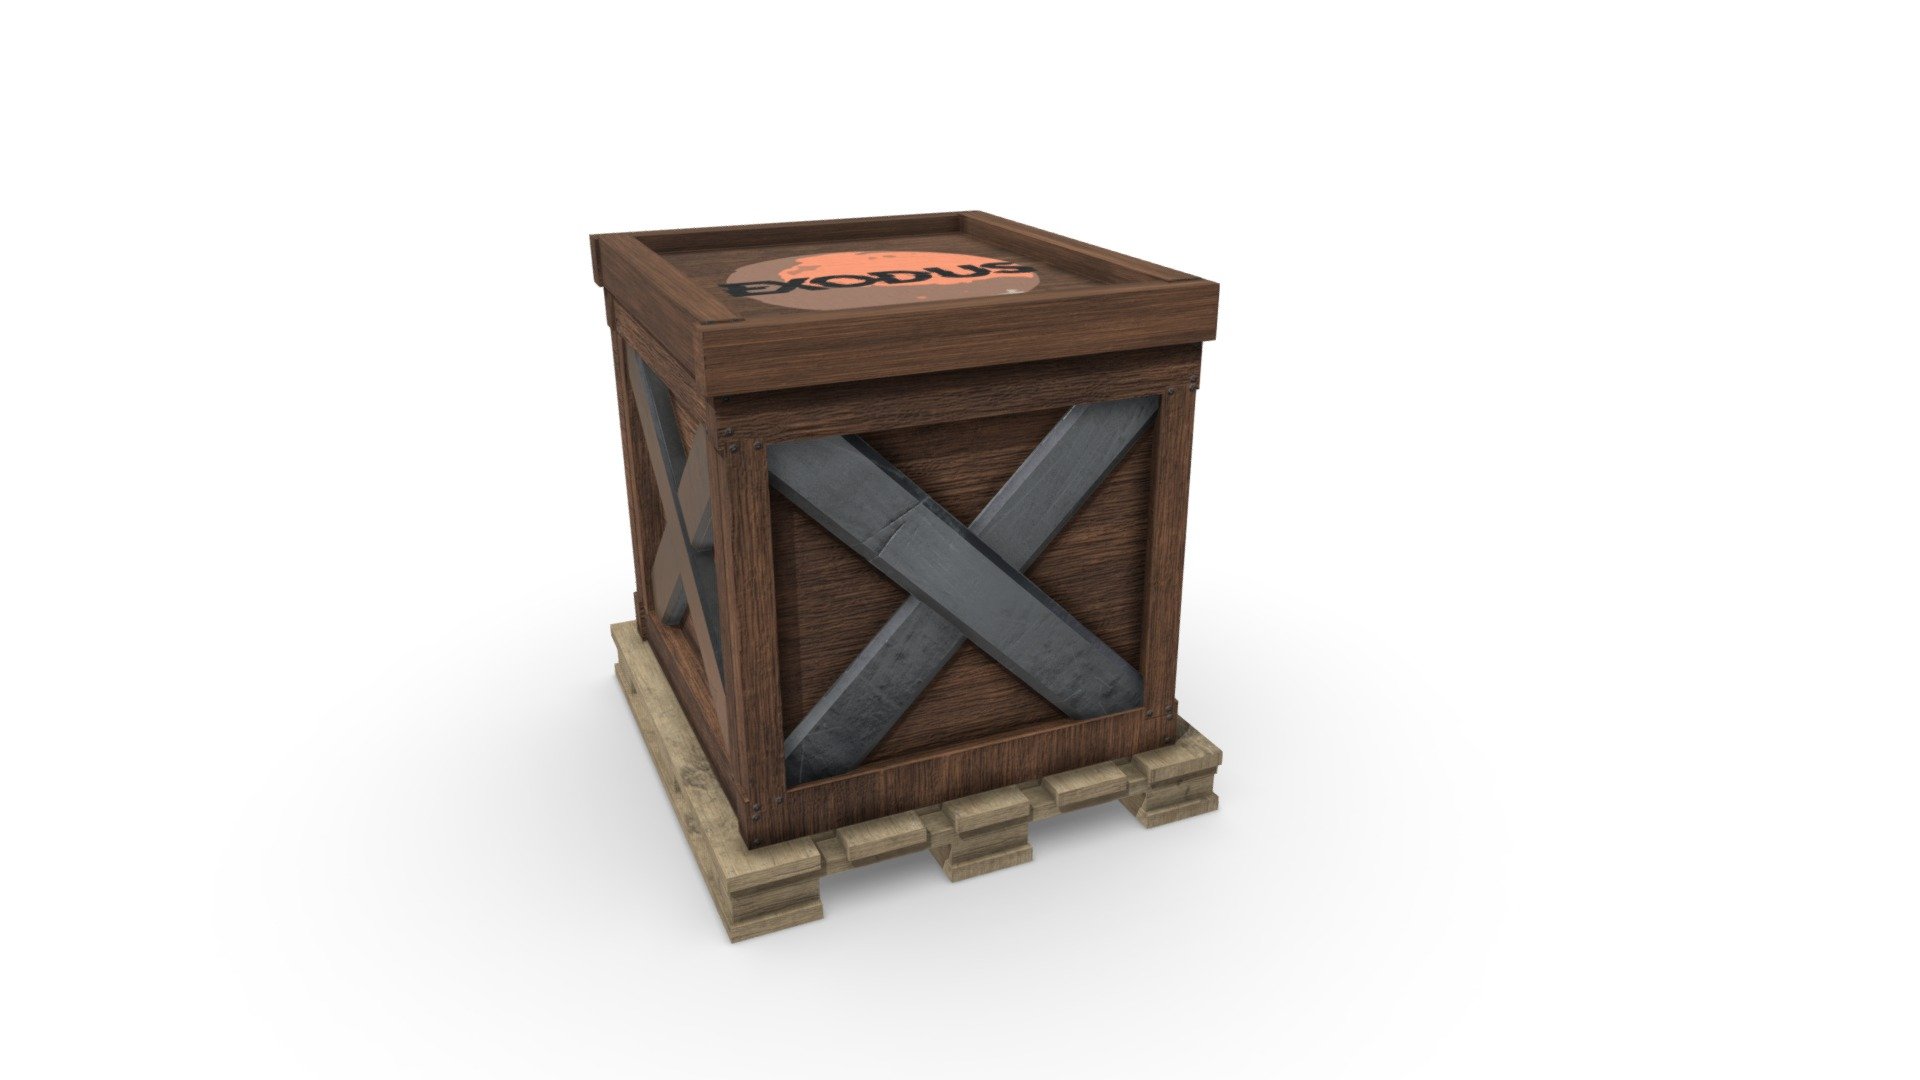 Shipping crate